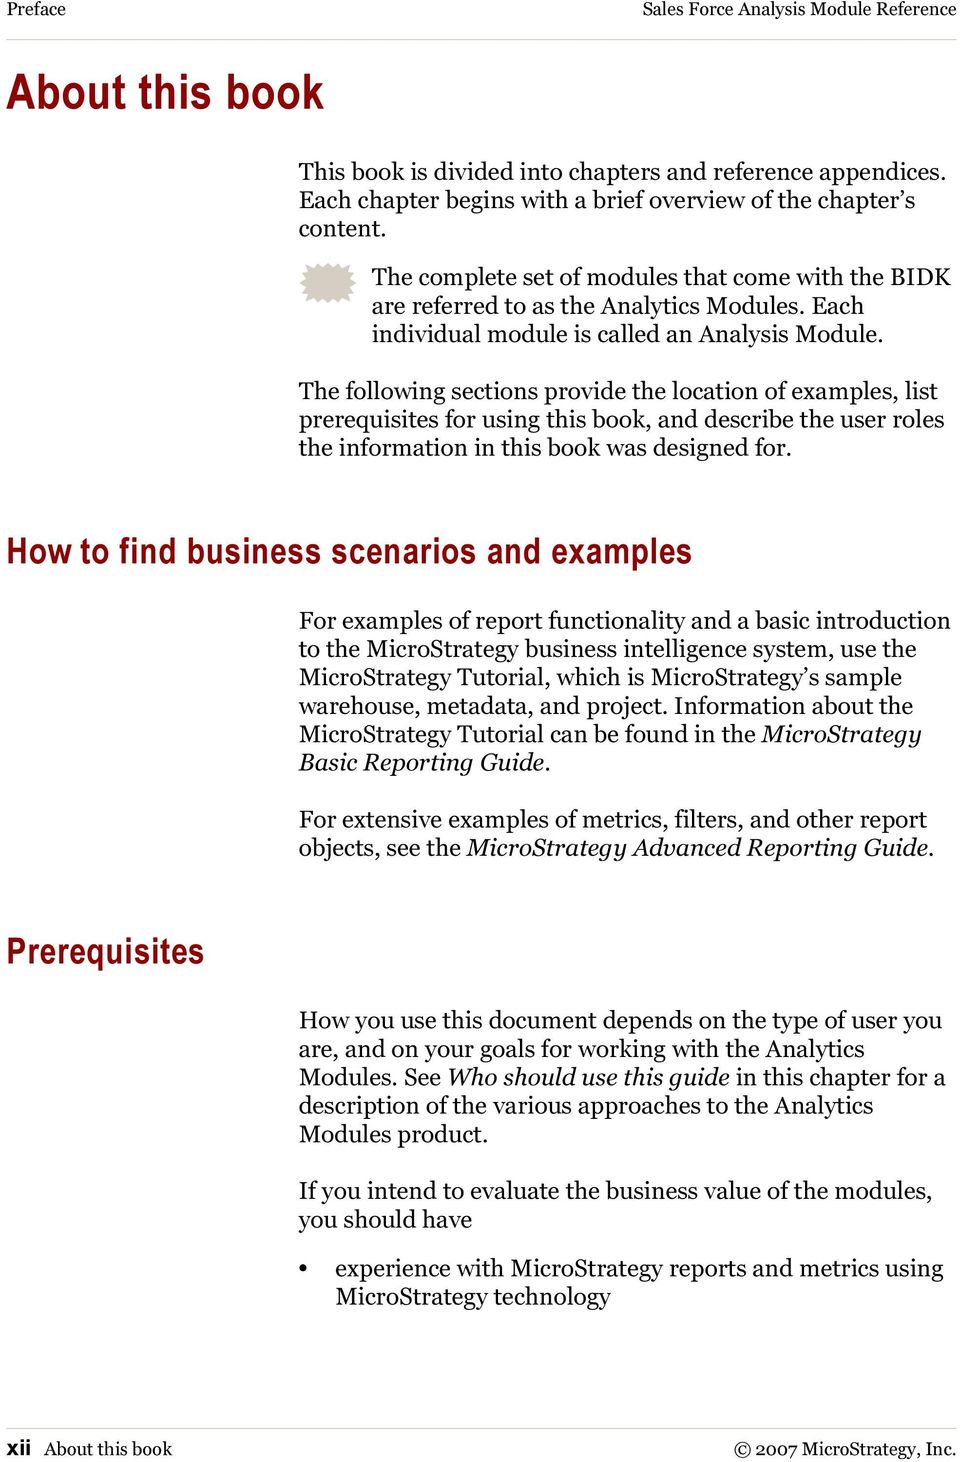 The following sections provide the location of examples, list prerequisites for using this book, and describe the user roles the information in this book was designed for.